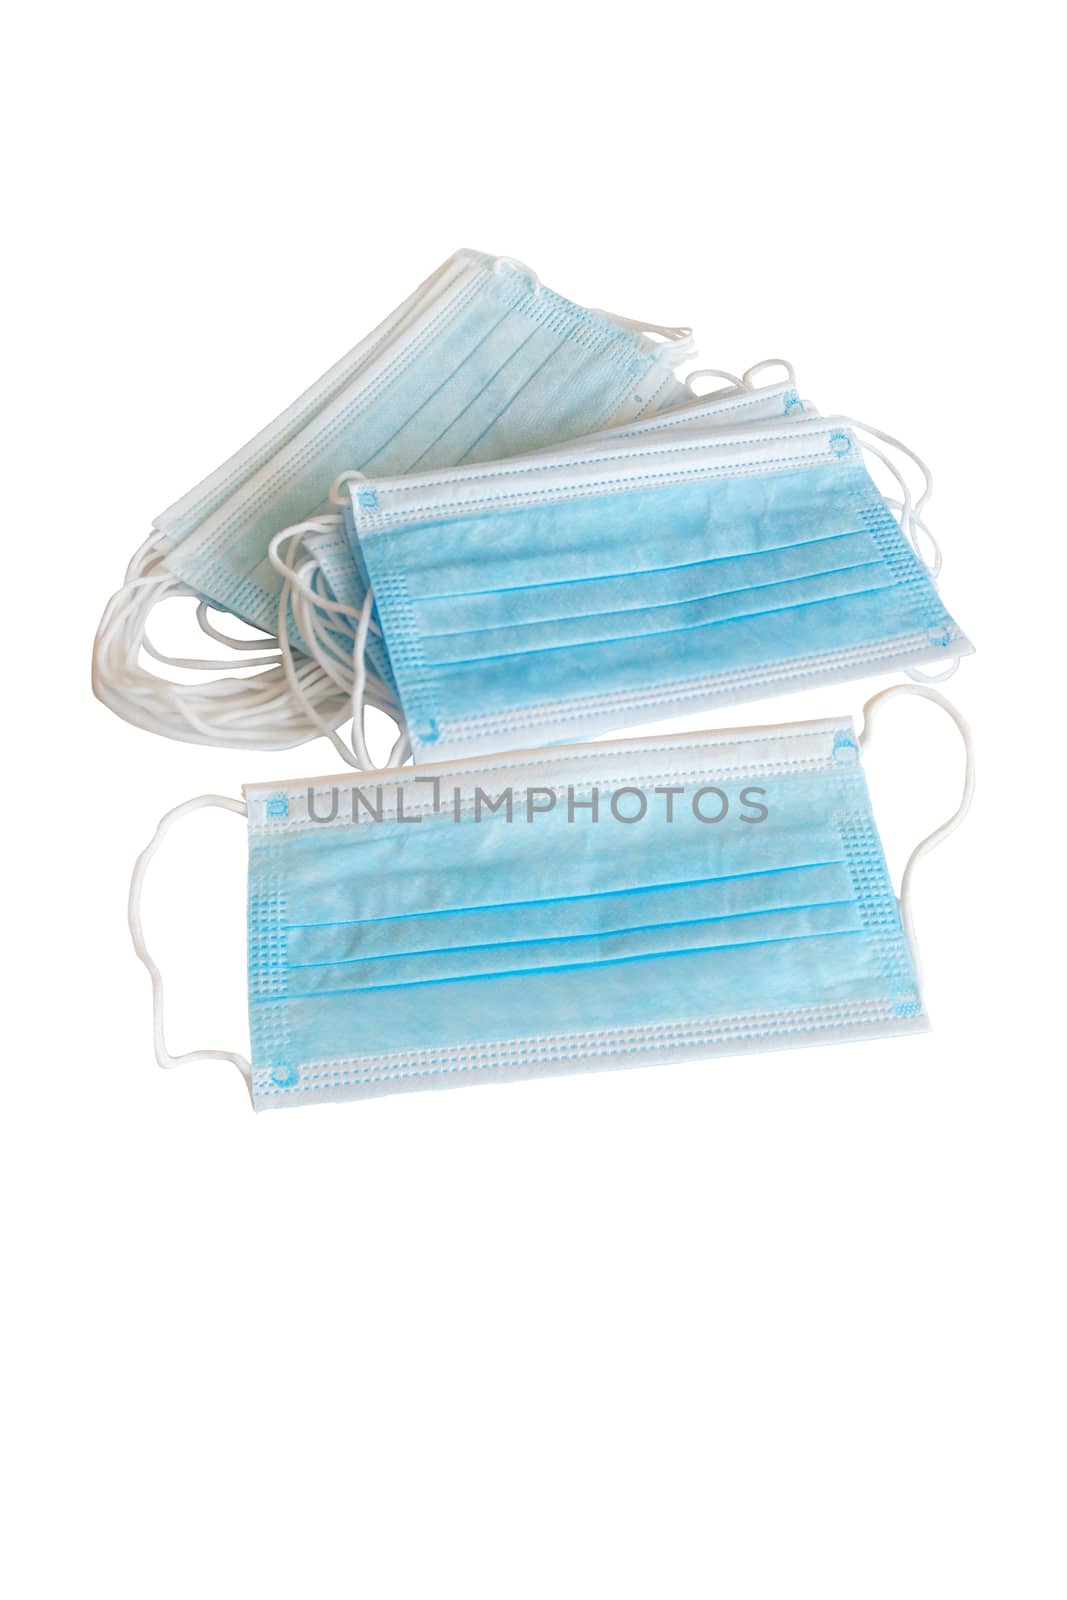 surgical mask on white background